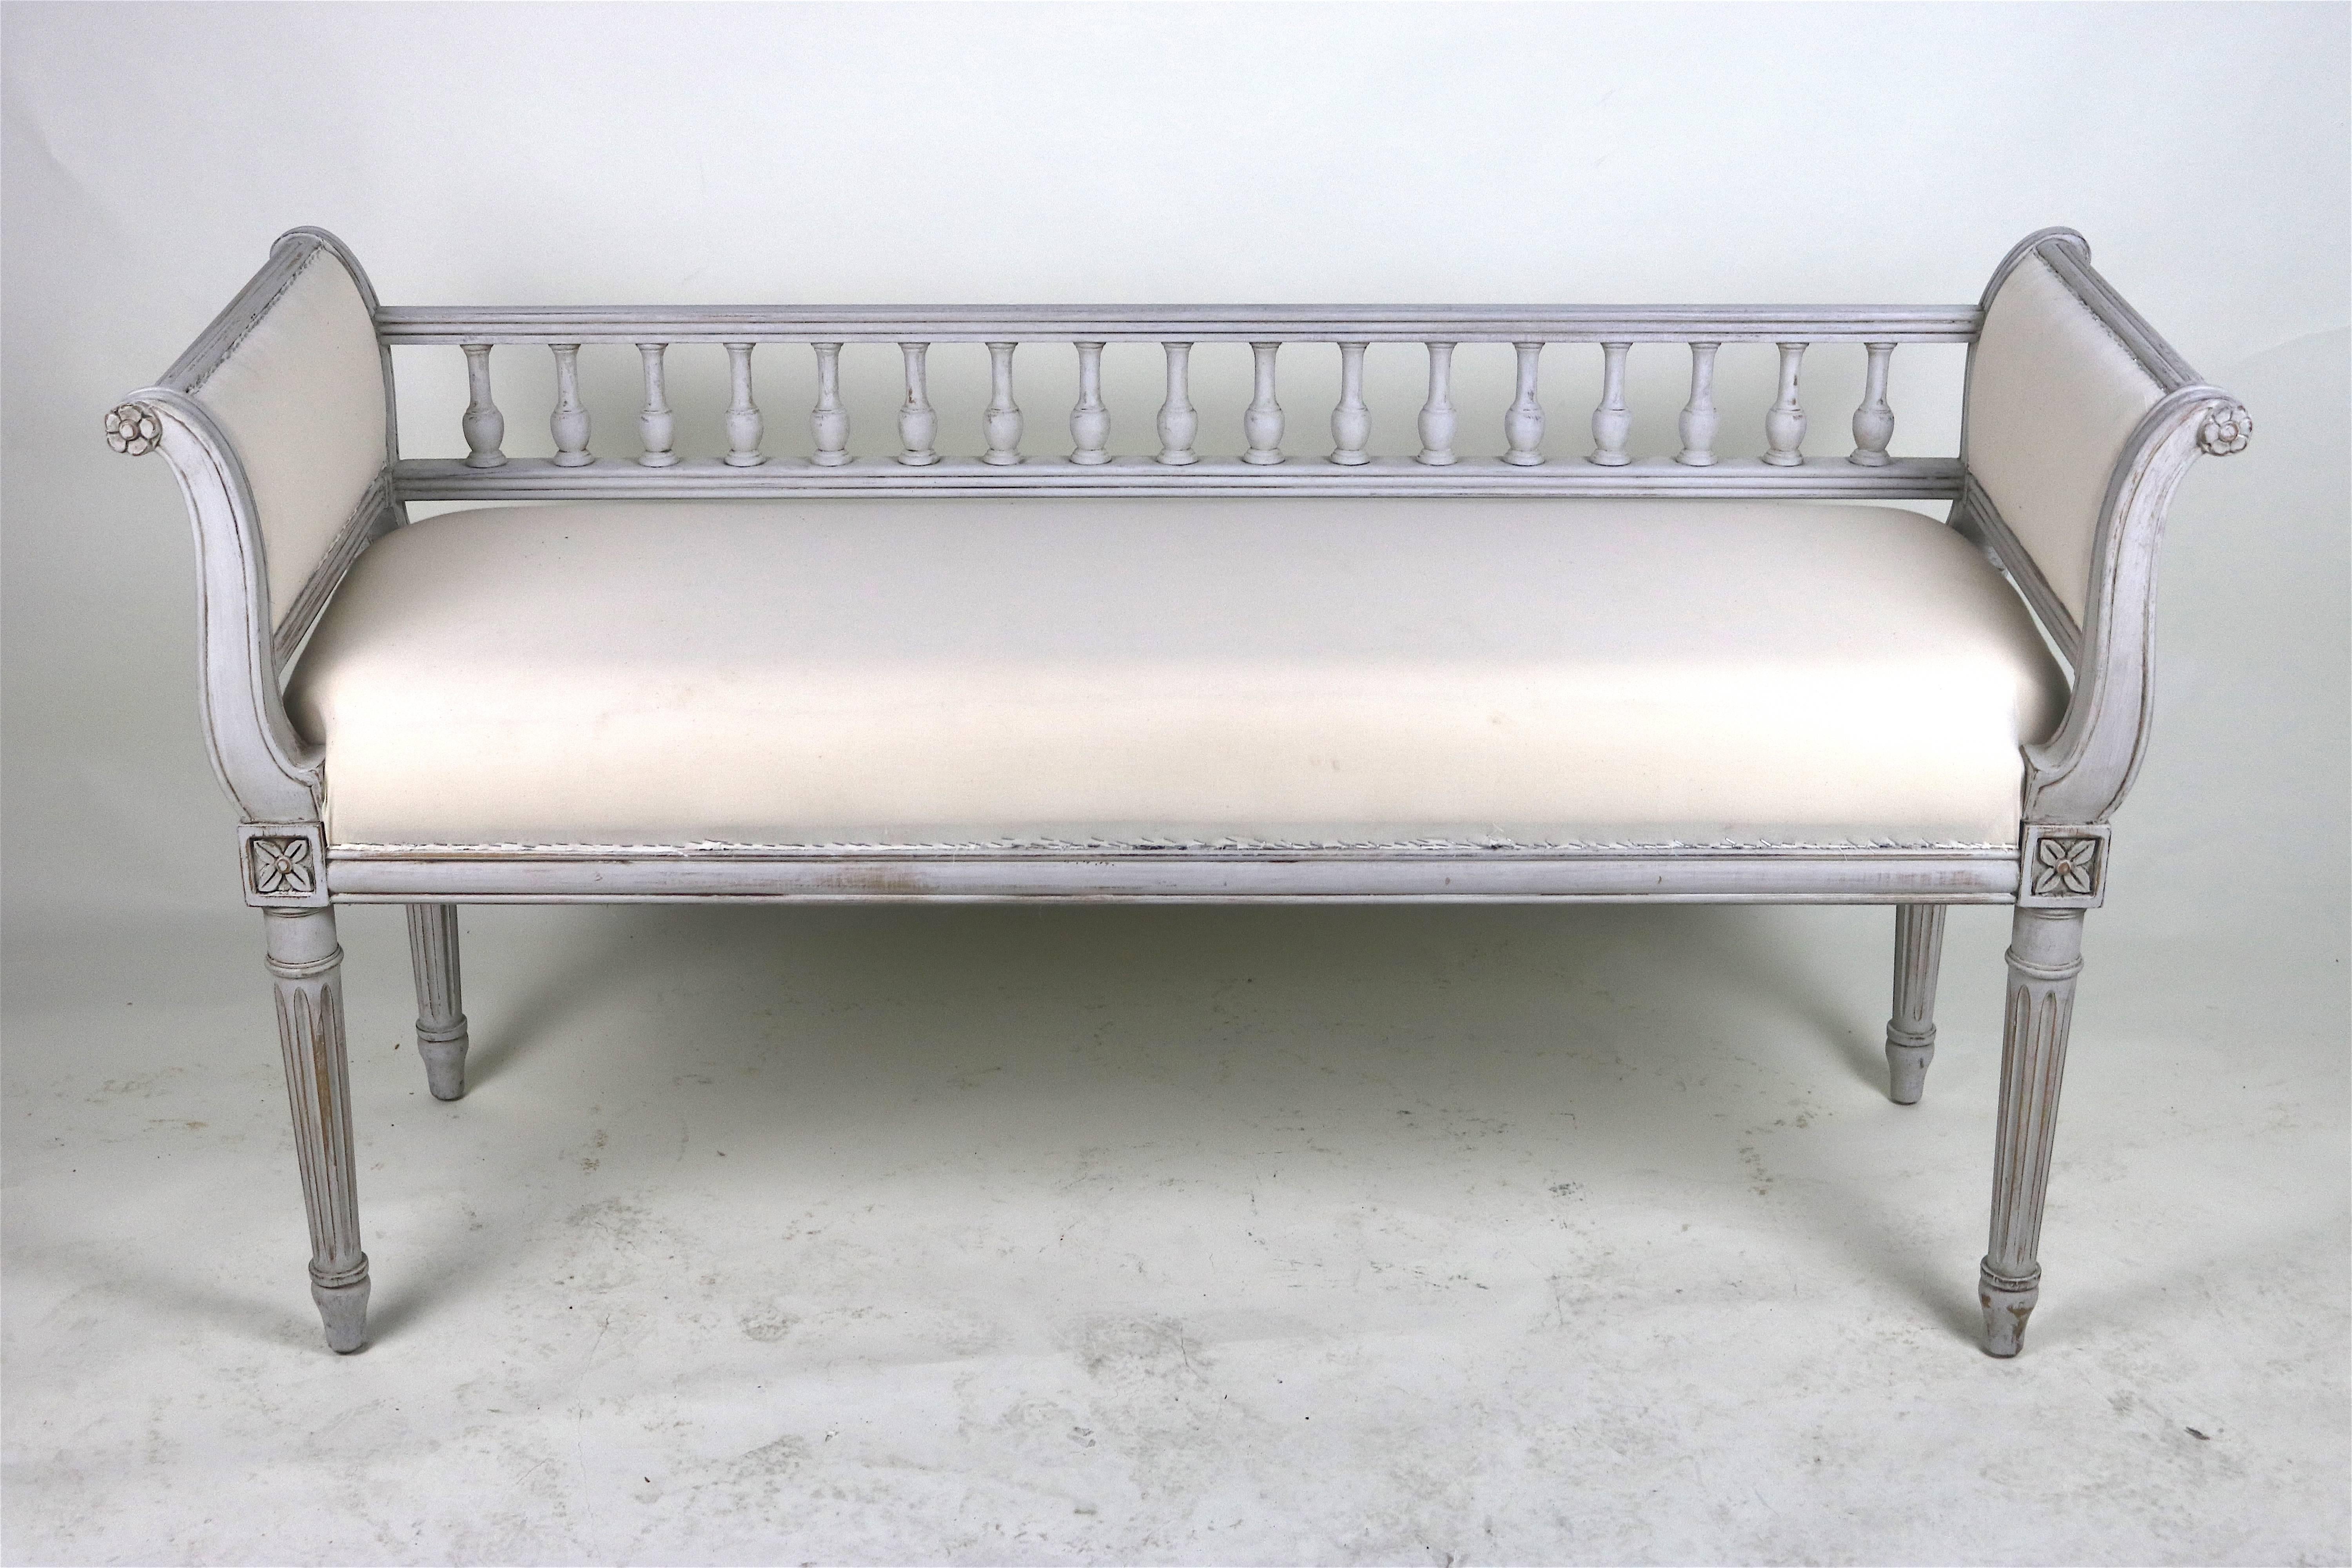 Rare lovely late 18th to early 19th century graceful Swedish Gustavian period carved painted wood bench with masterfully carved classical details lovely carved spindle back between curvilinear sides and carved legs with floral motif.
Beautiful aged